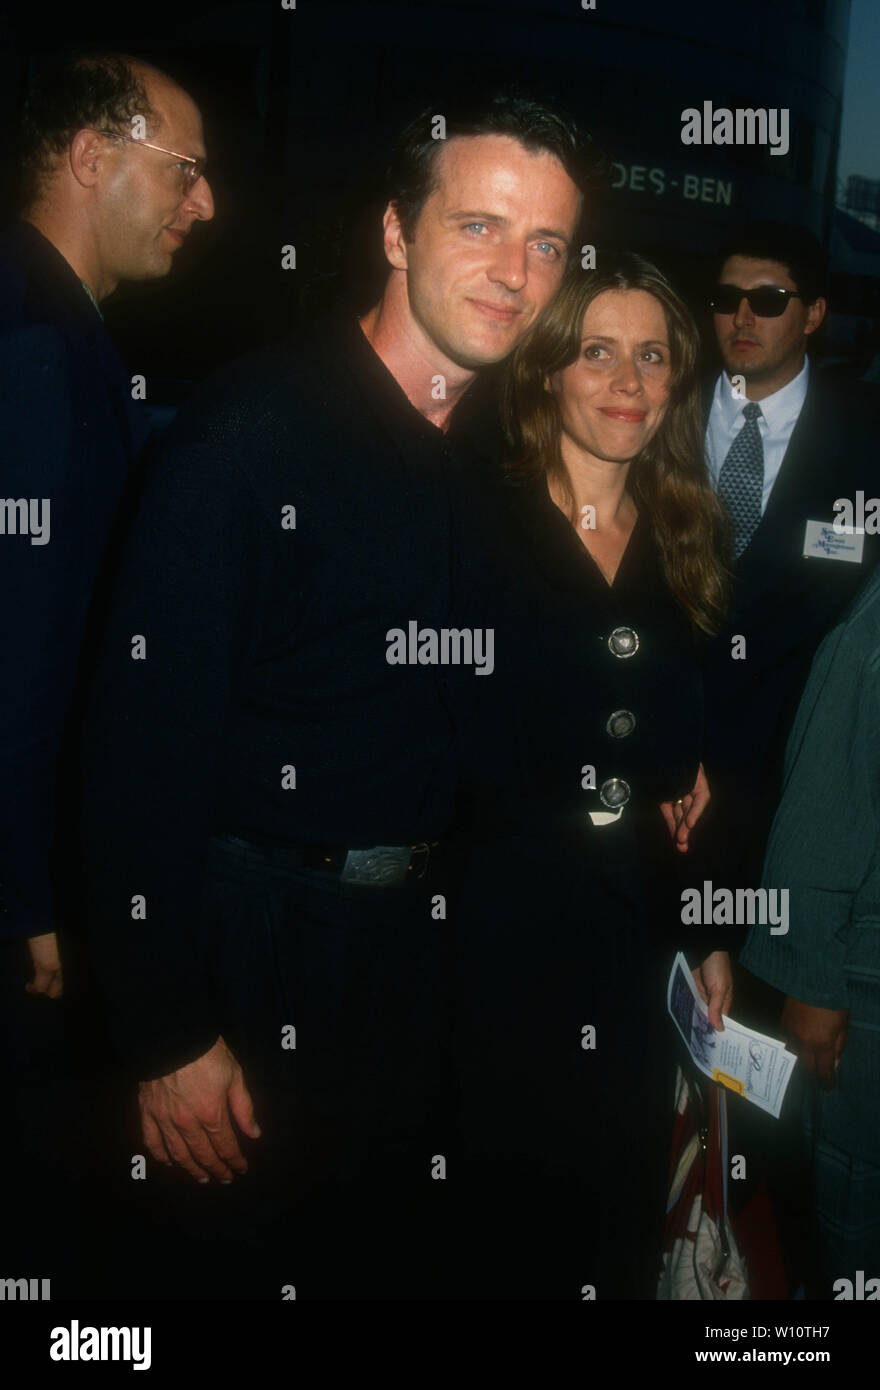 Hollywood, California, USA 9th August 1994 Actor Aidan Quinn attends the premiere of 'The Adventures of Priscilla, Queen of the Desert' on August 9, 1994 at Cinerama Dome Theater in Hollywood, California, USA. Photo by Barry King/Alamy Stock Photo Stock Photo